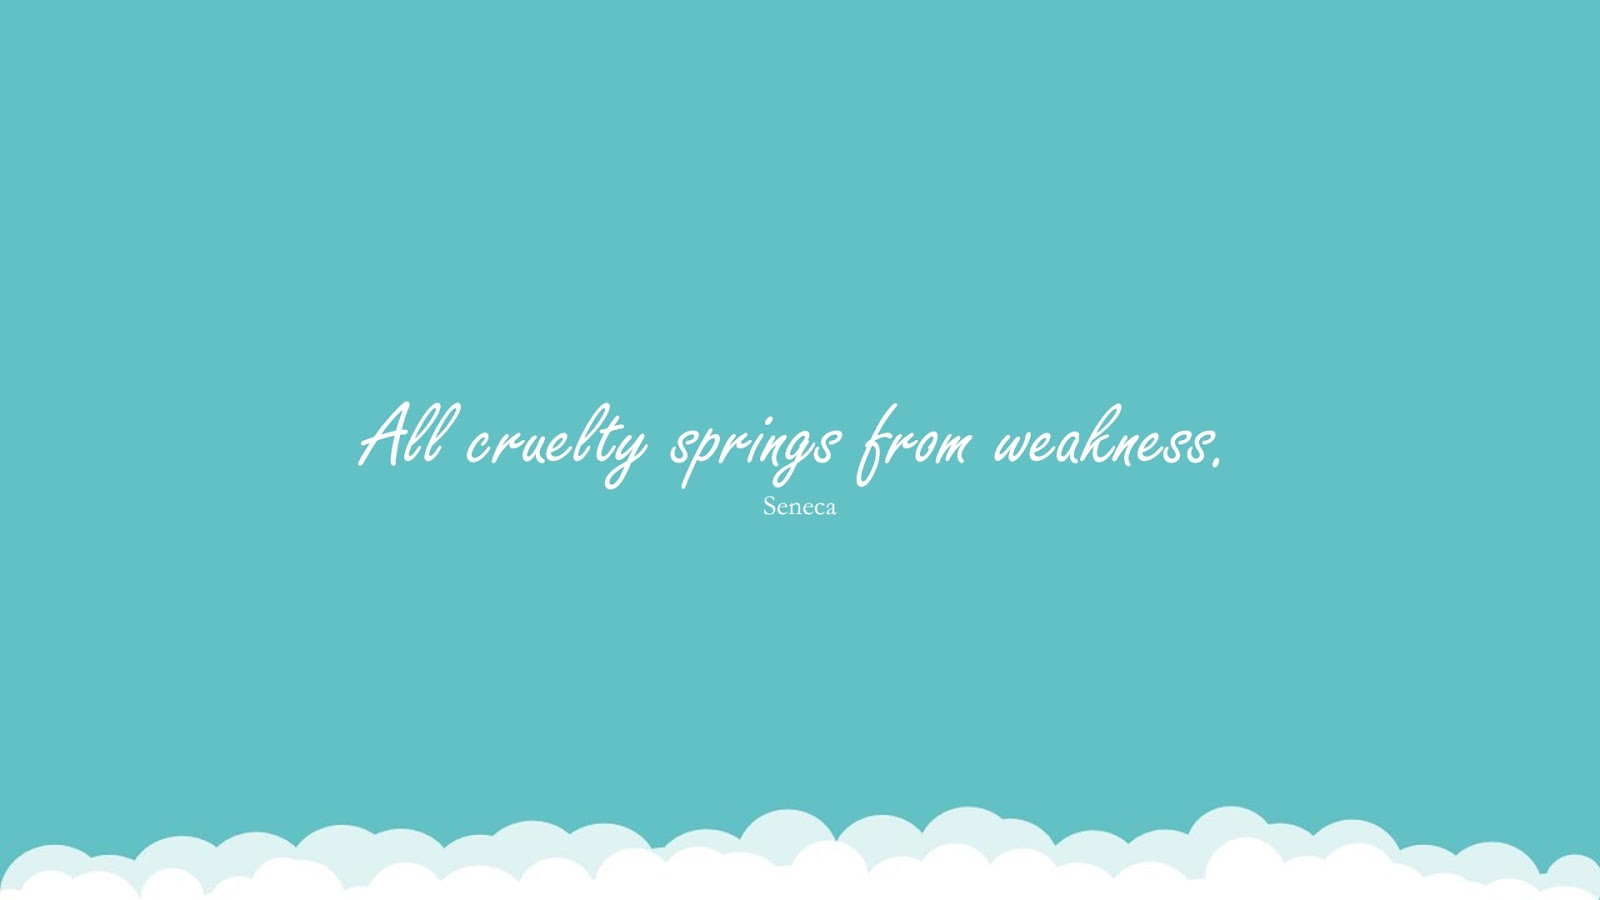 All cruelty springs from weakness. (Seneca);  #StoicQuotes